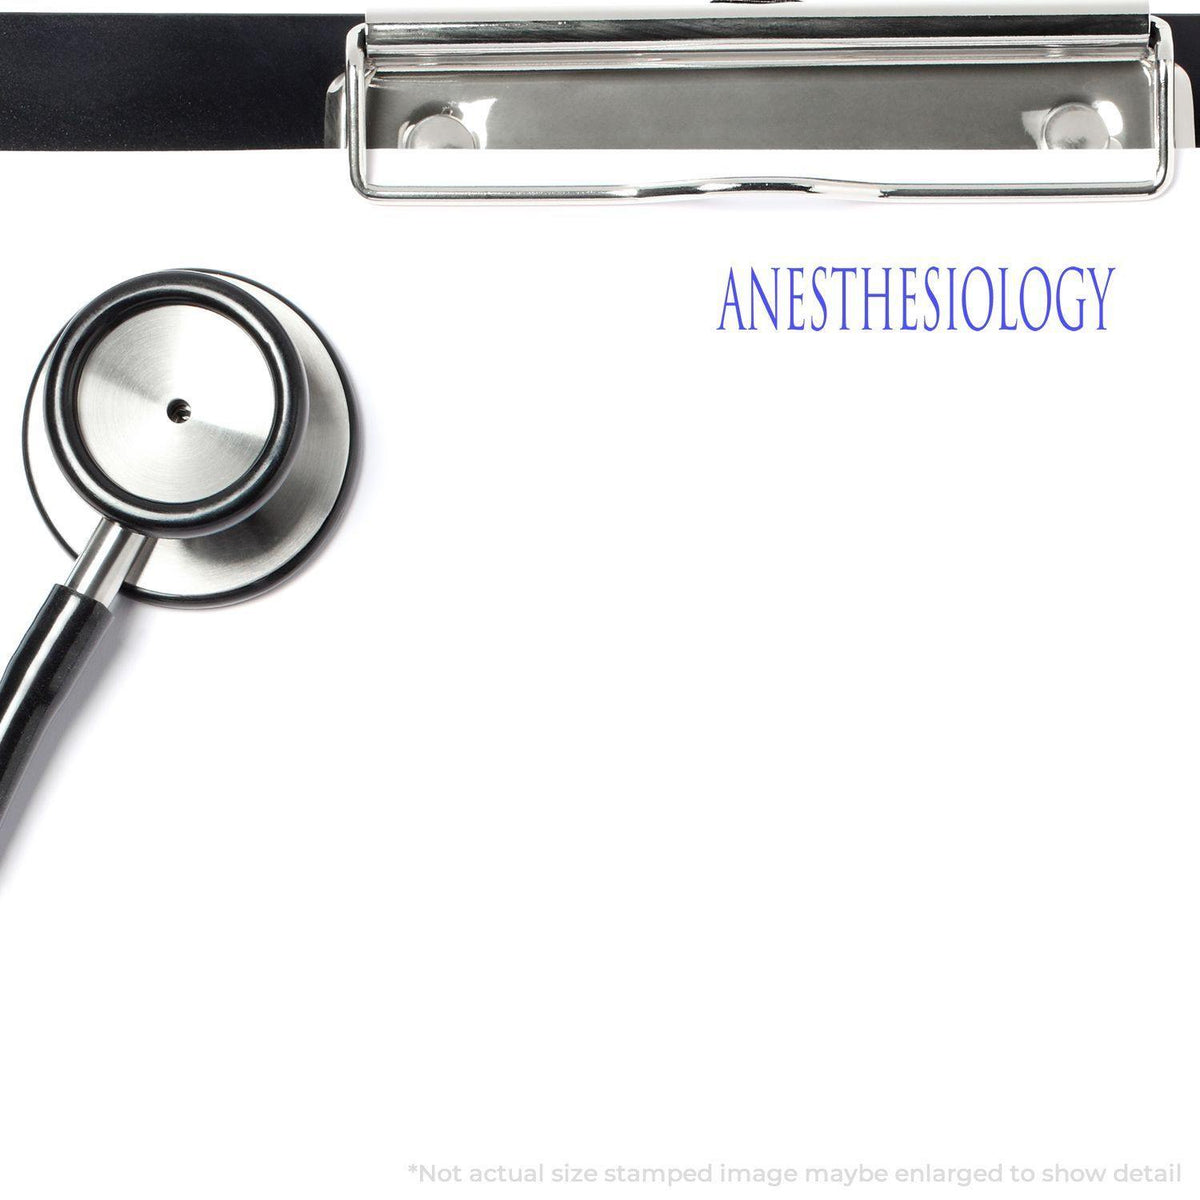 Large Anesthesiology Rubber Stamp Lifestyle Photo